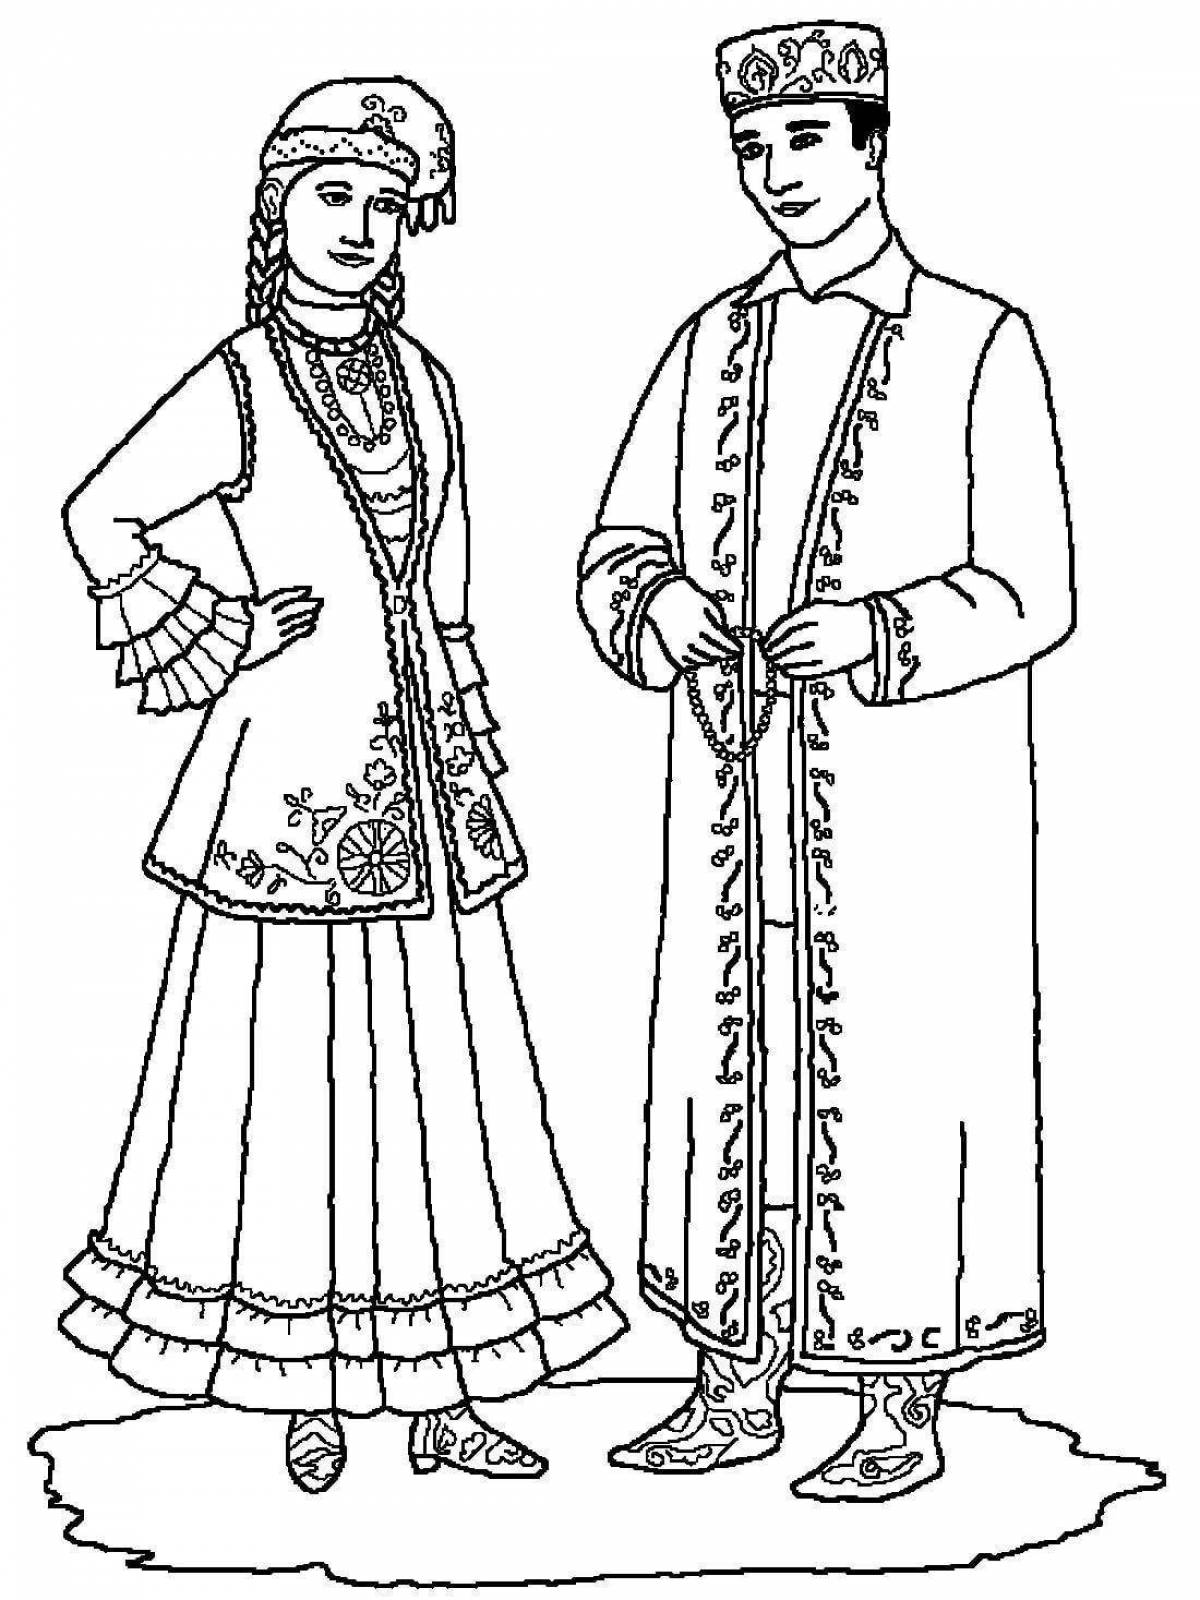 Coloring page mari national costume